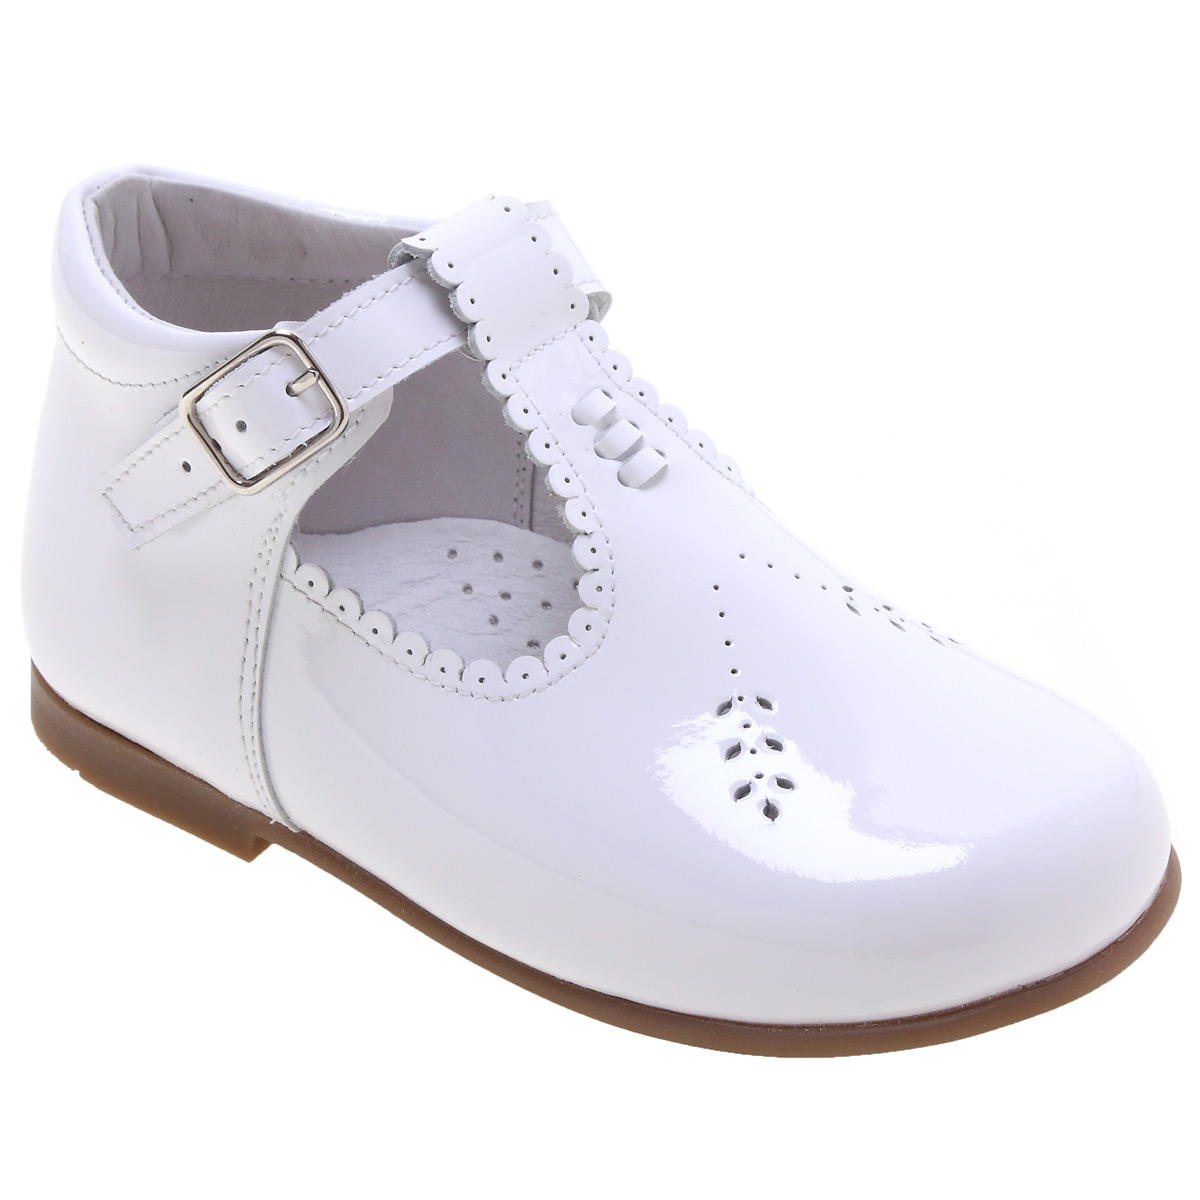 girls patent t bar shoes